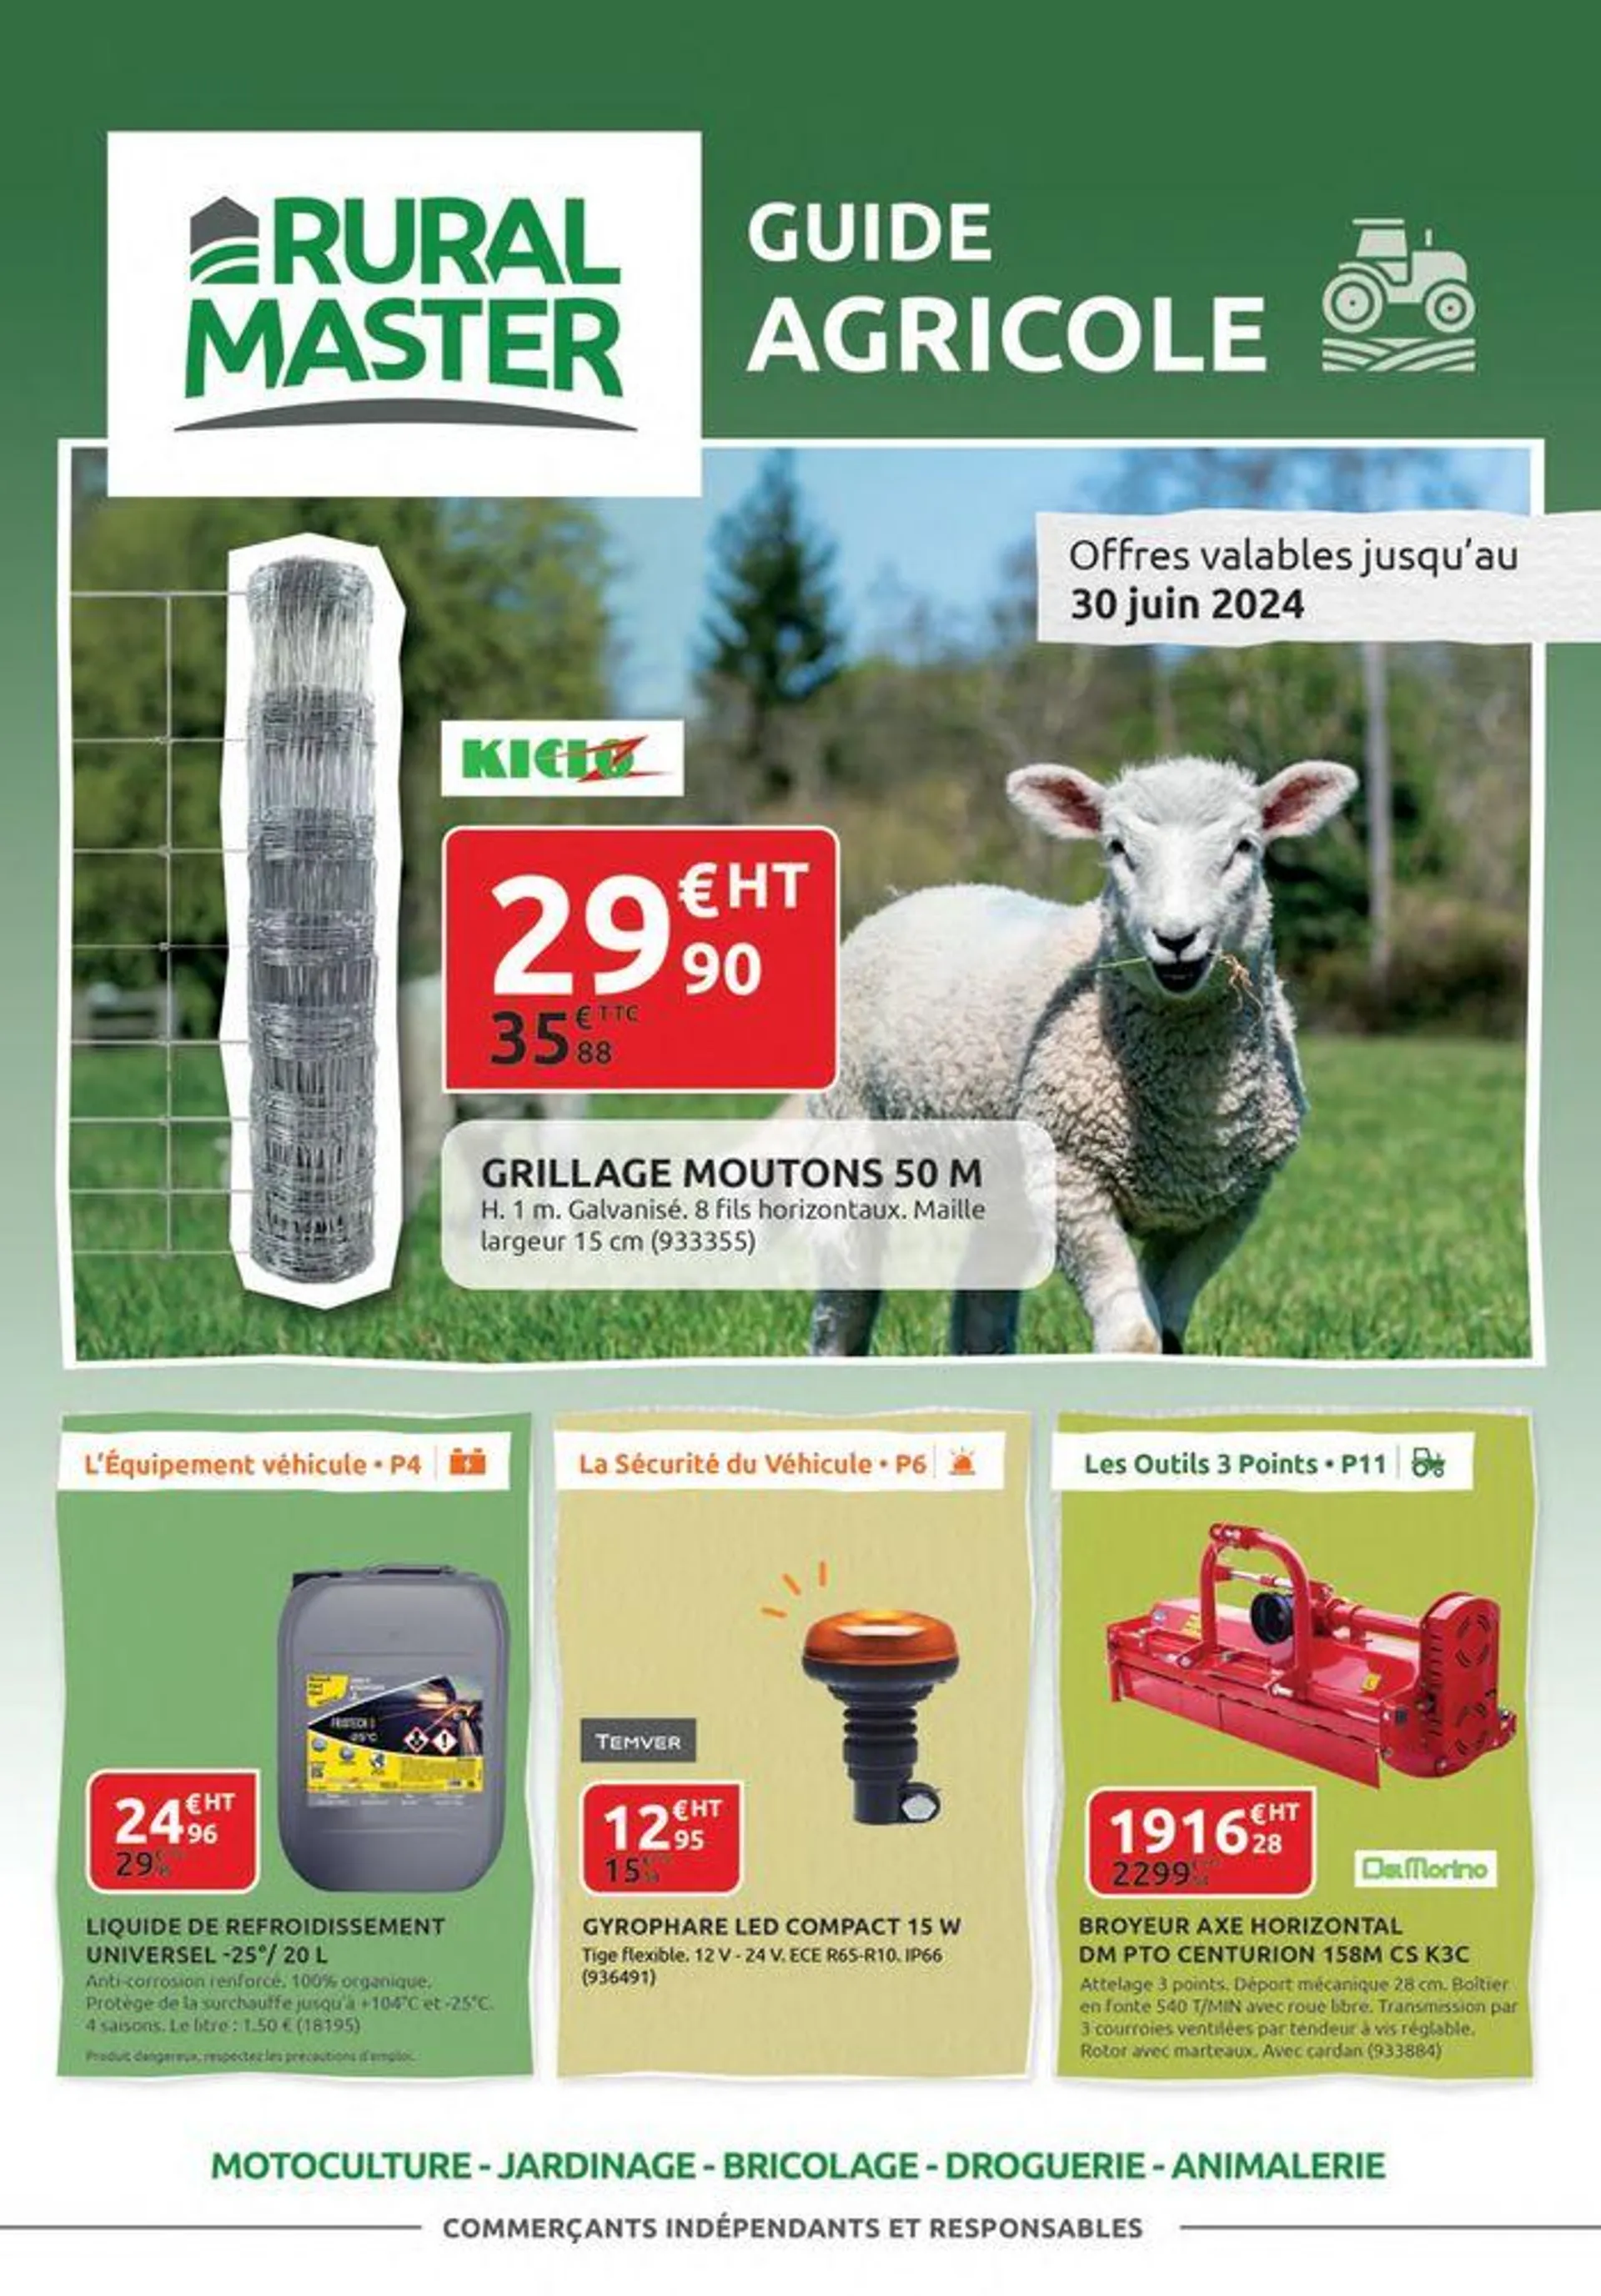 GUIDE AGRICOLE - 1